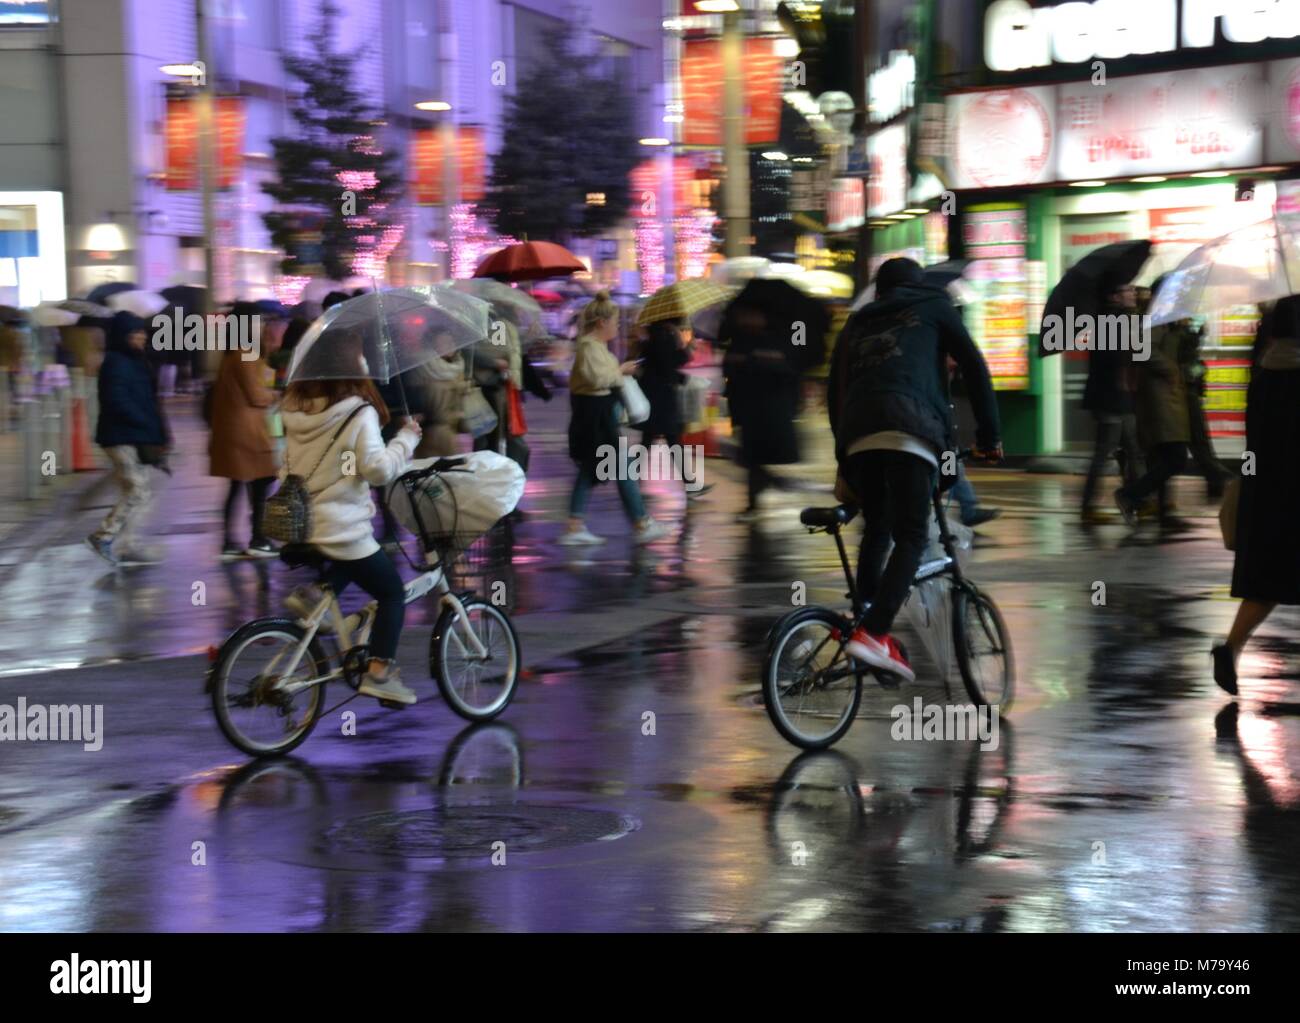 BMX bicycles riding through Tokyo on a raining night with bright neon lights Stock Photo